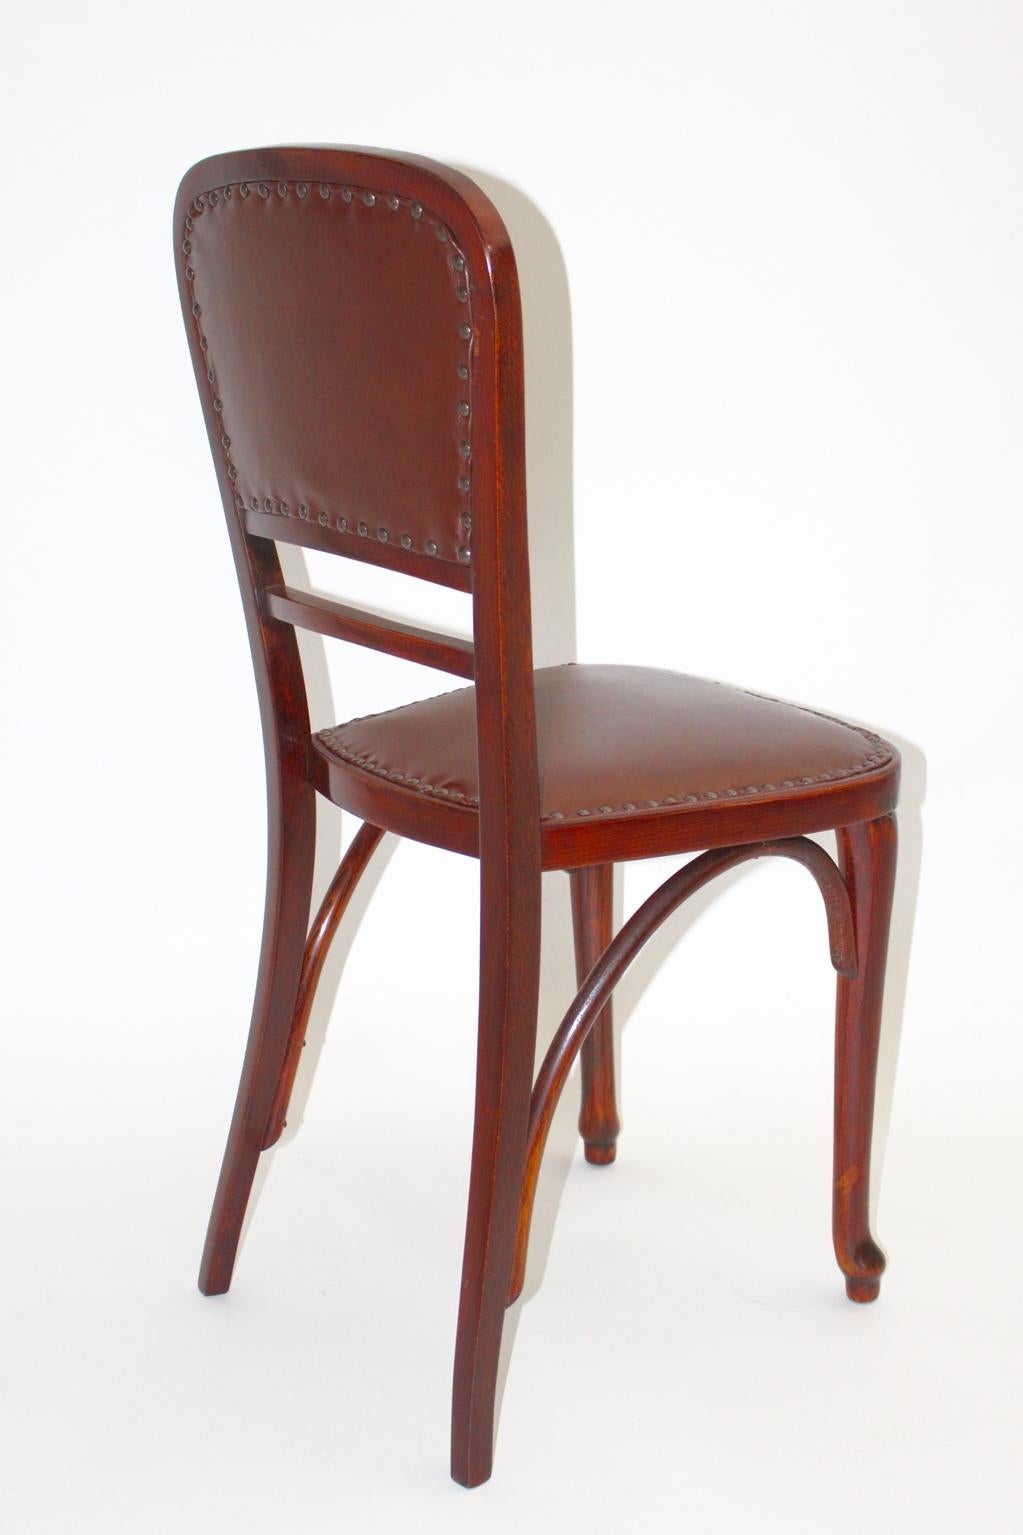 Jugendstil vintage beech and leather Viennese chair by Thonet got the Kat. Nr. 491 designed and manufactured circa 1904.
The chair frame was made of beechwood and is cleaned and hand-polished furthermore the seat and the back is covered with cognac